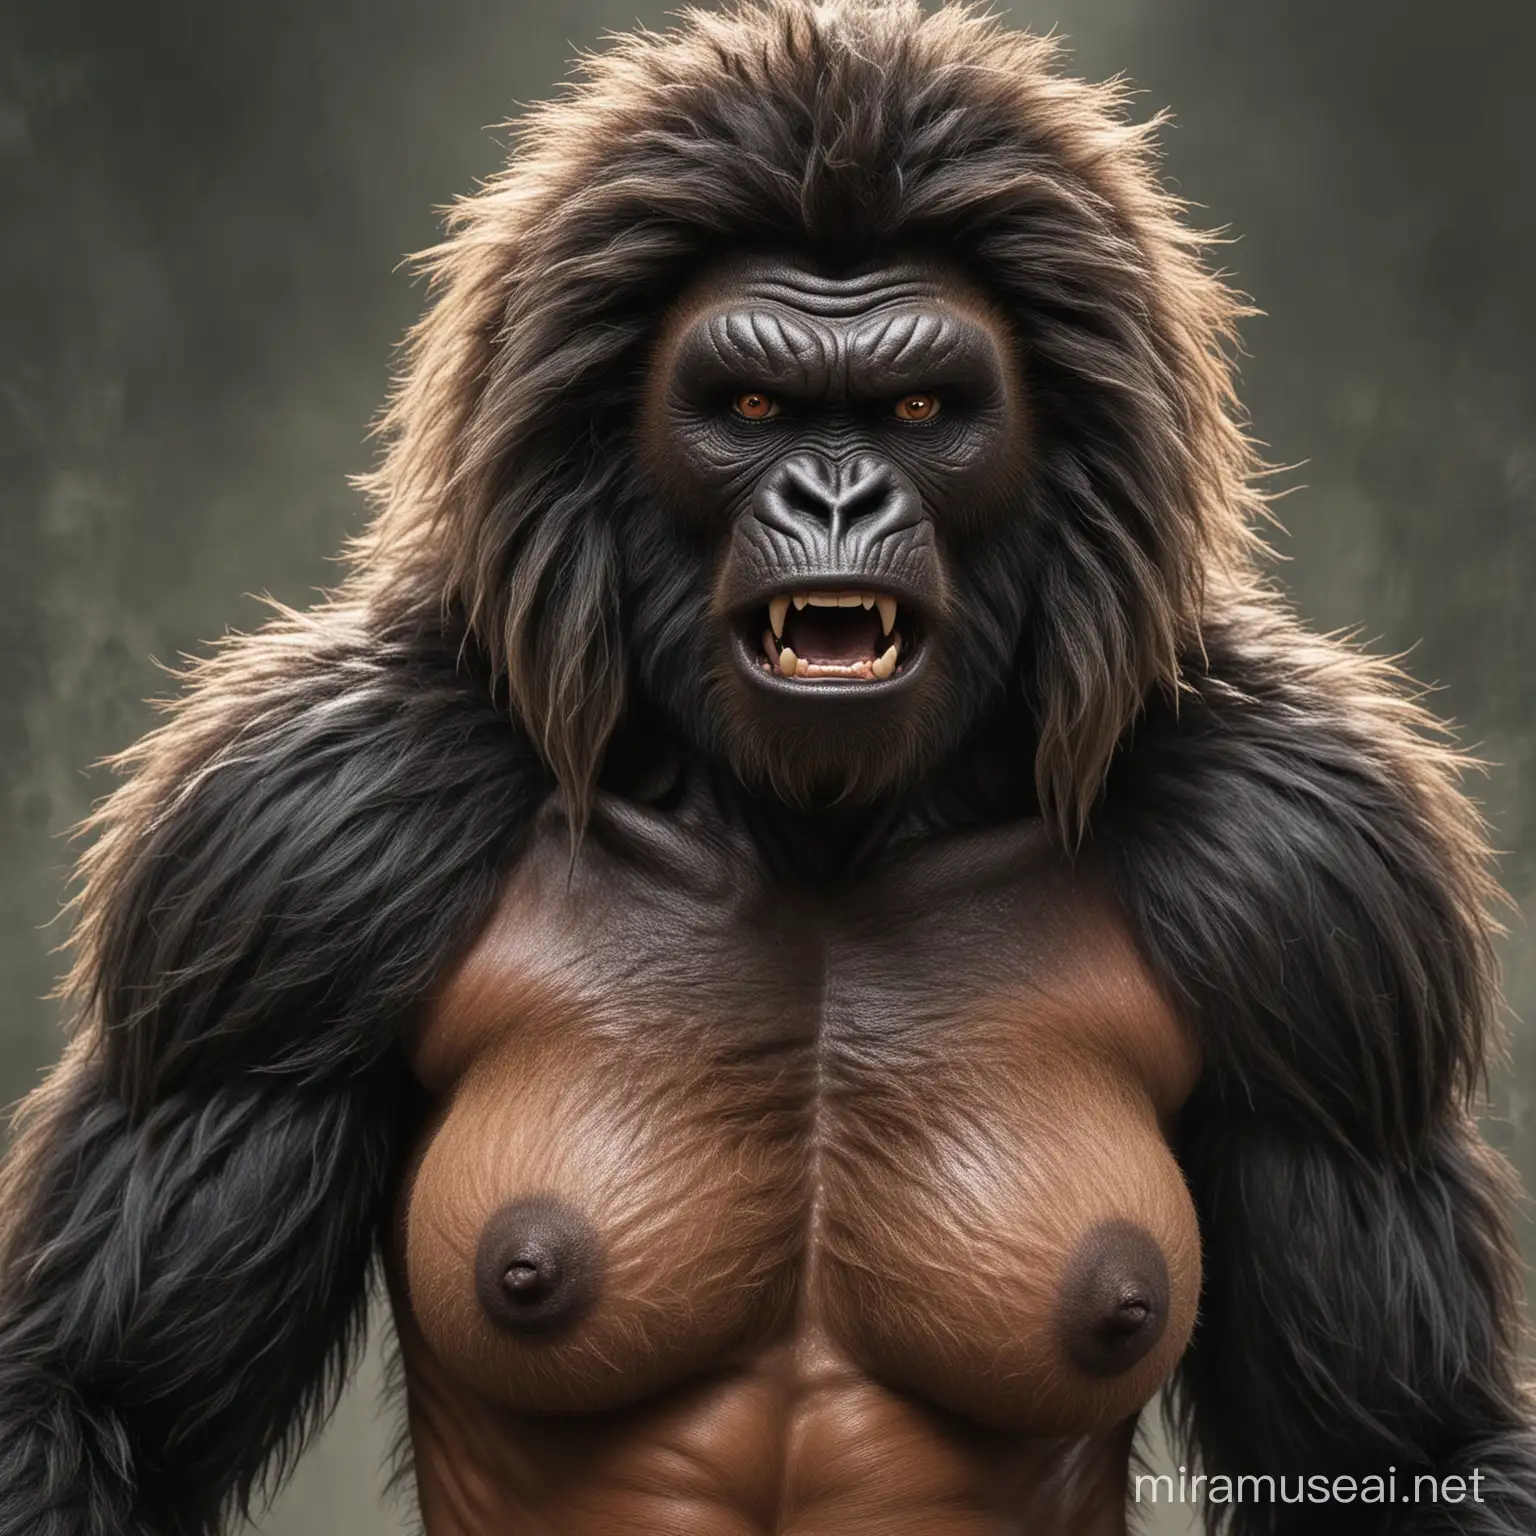 Transformation into Weregorilla BrownSkinned Hairy Female Body Displaying Gorilla Features